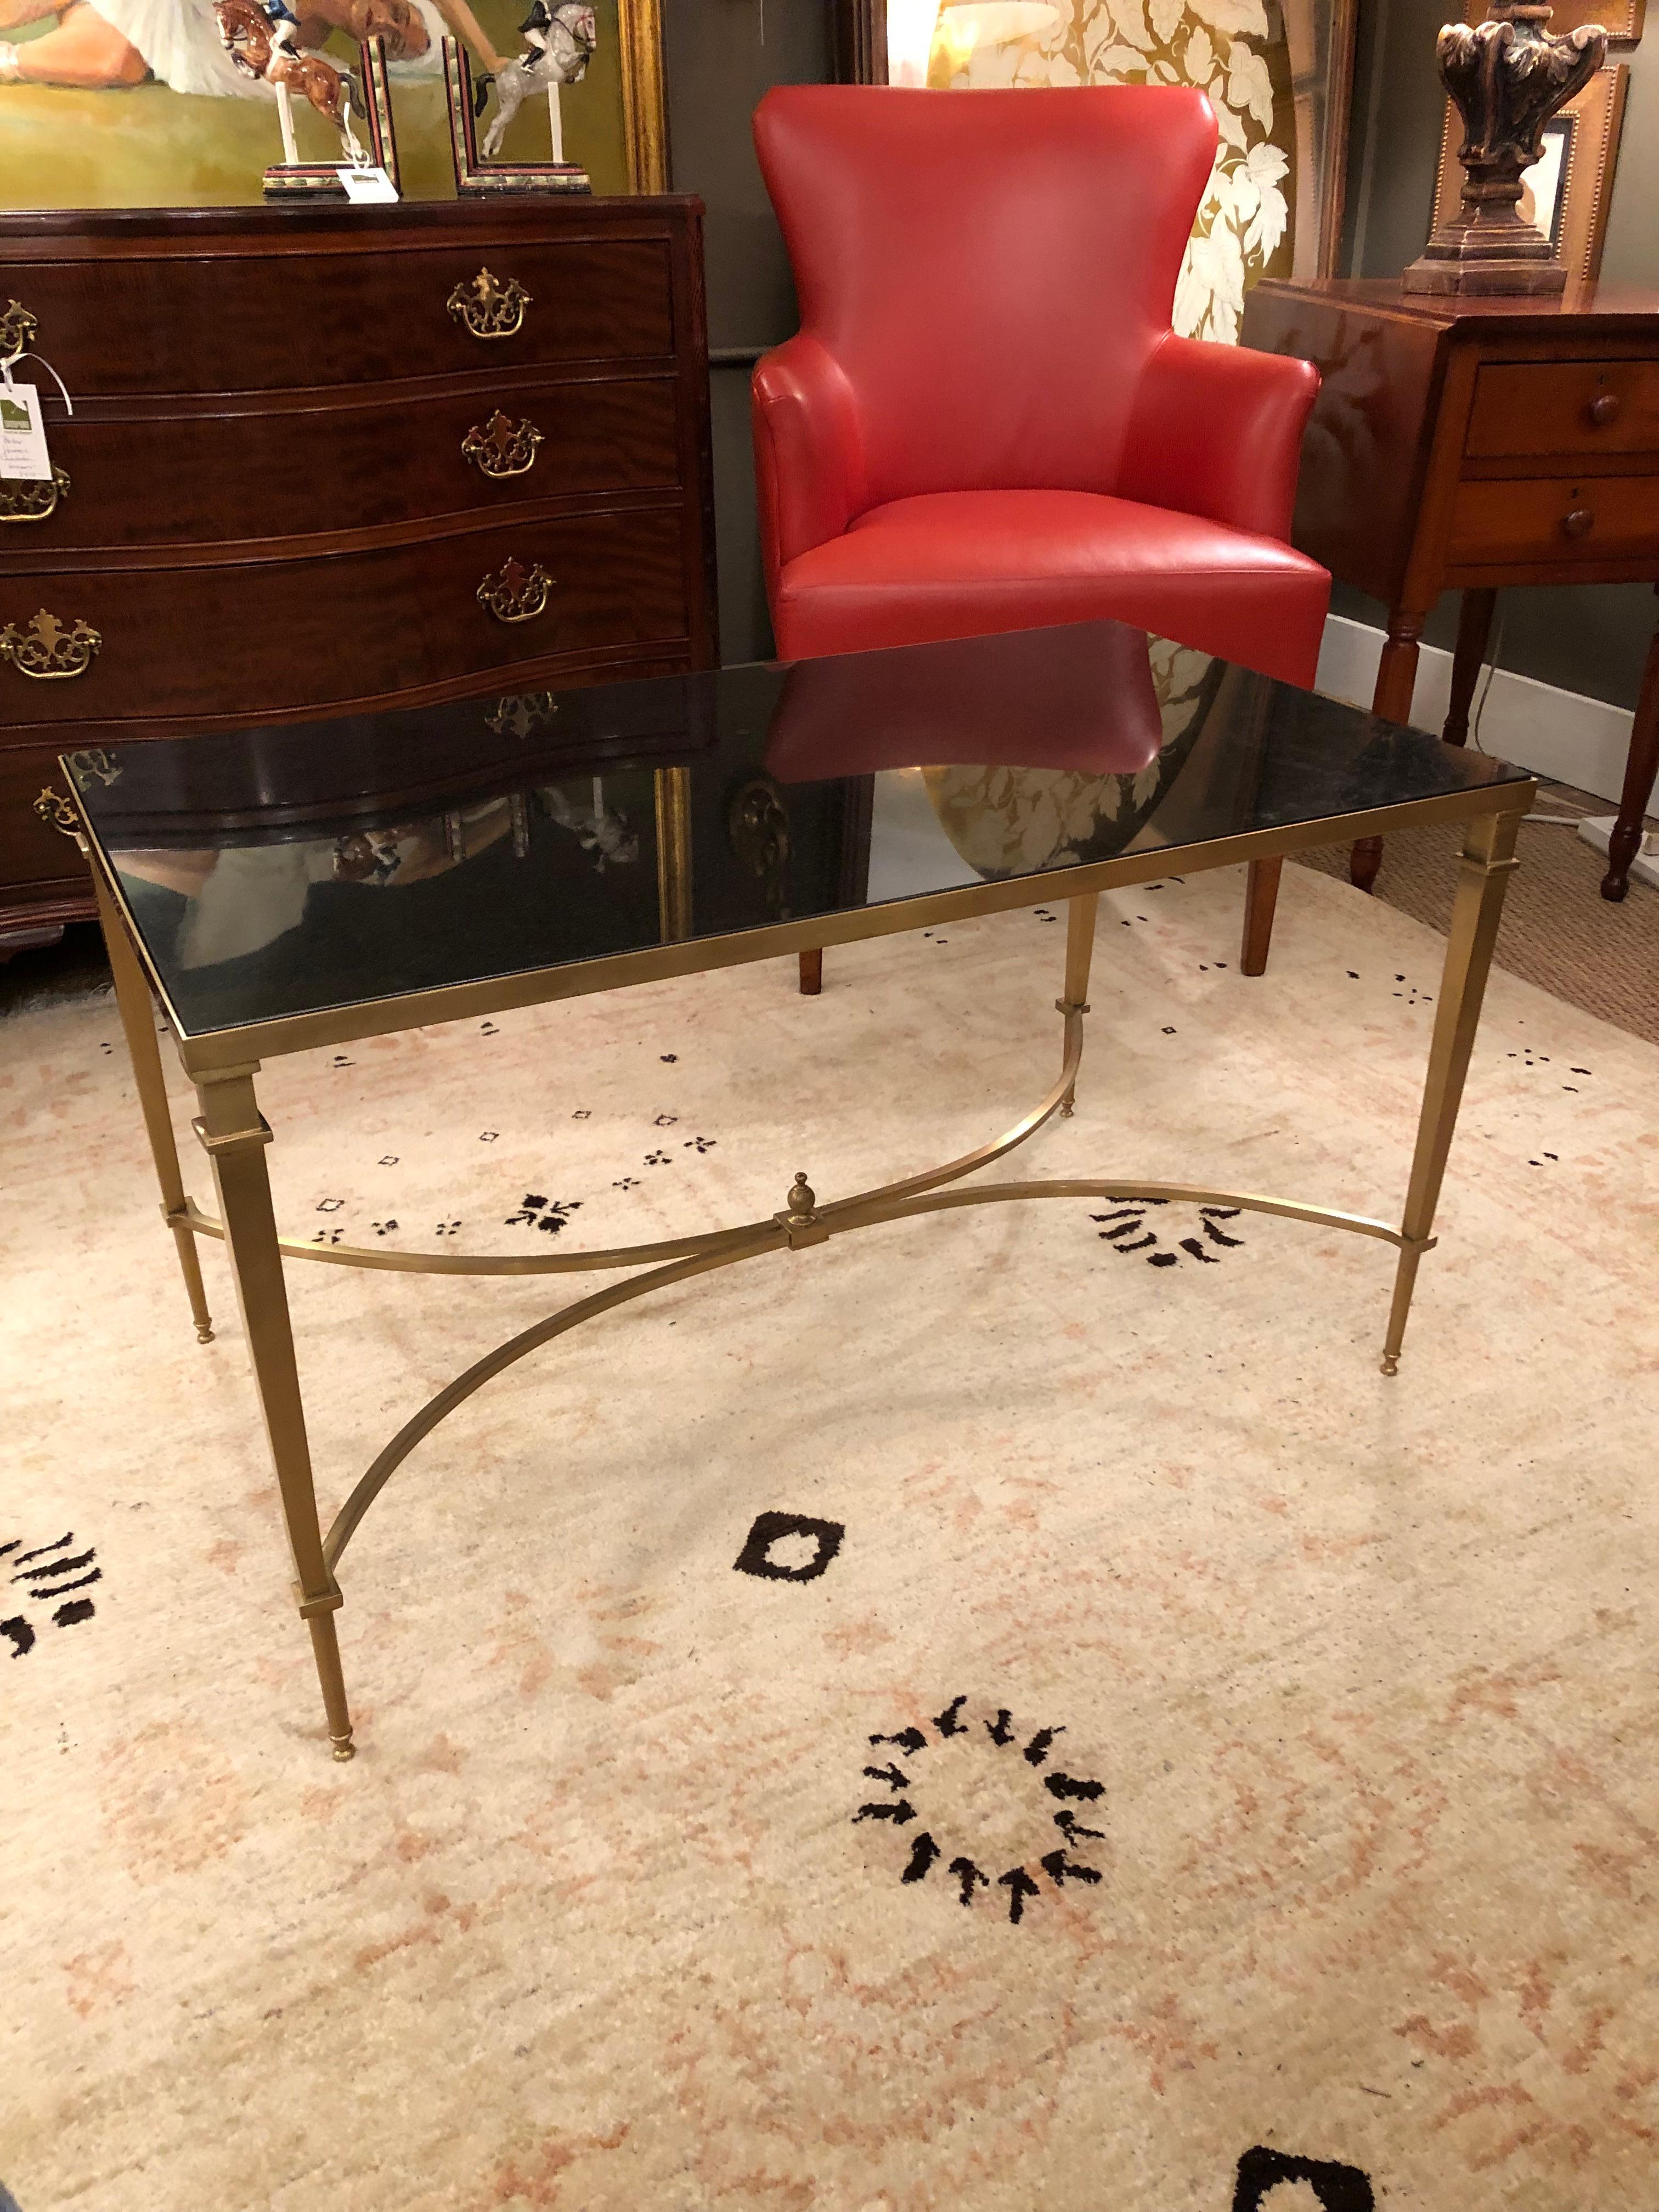 A sleek elegant rectangular coffee table having striking warm rubbed bronze finish brass offset by black granite top. The elegant legs and stretcher with finial are thin, but heavy and beautifully made.